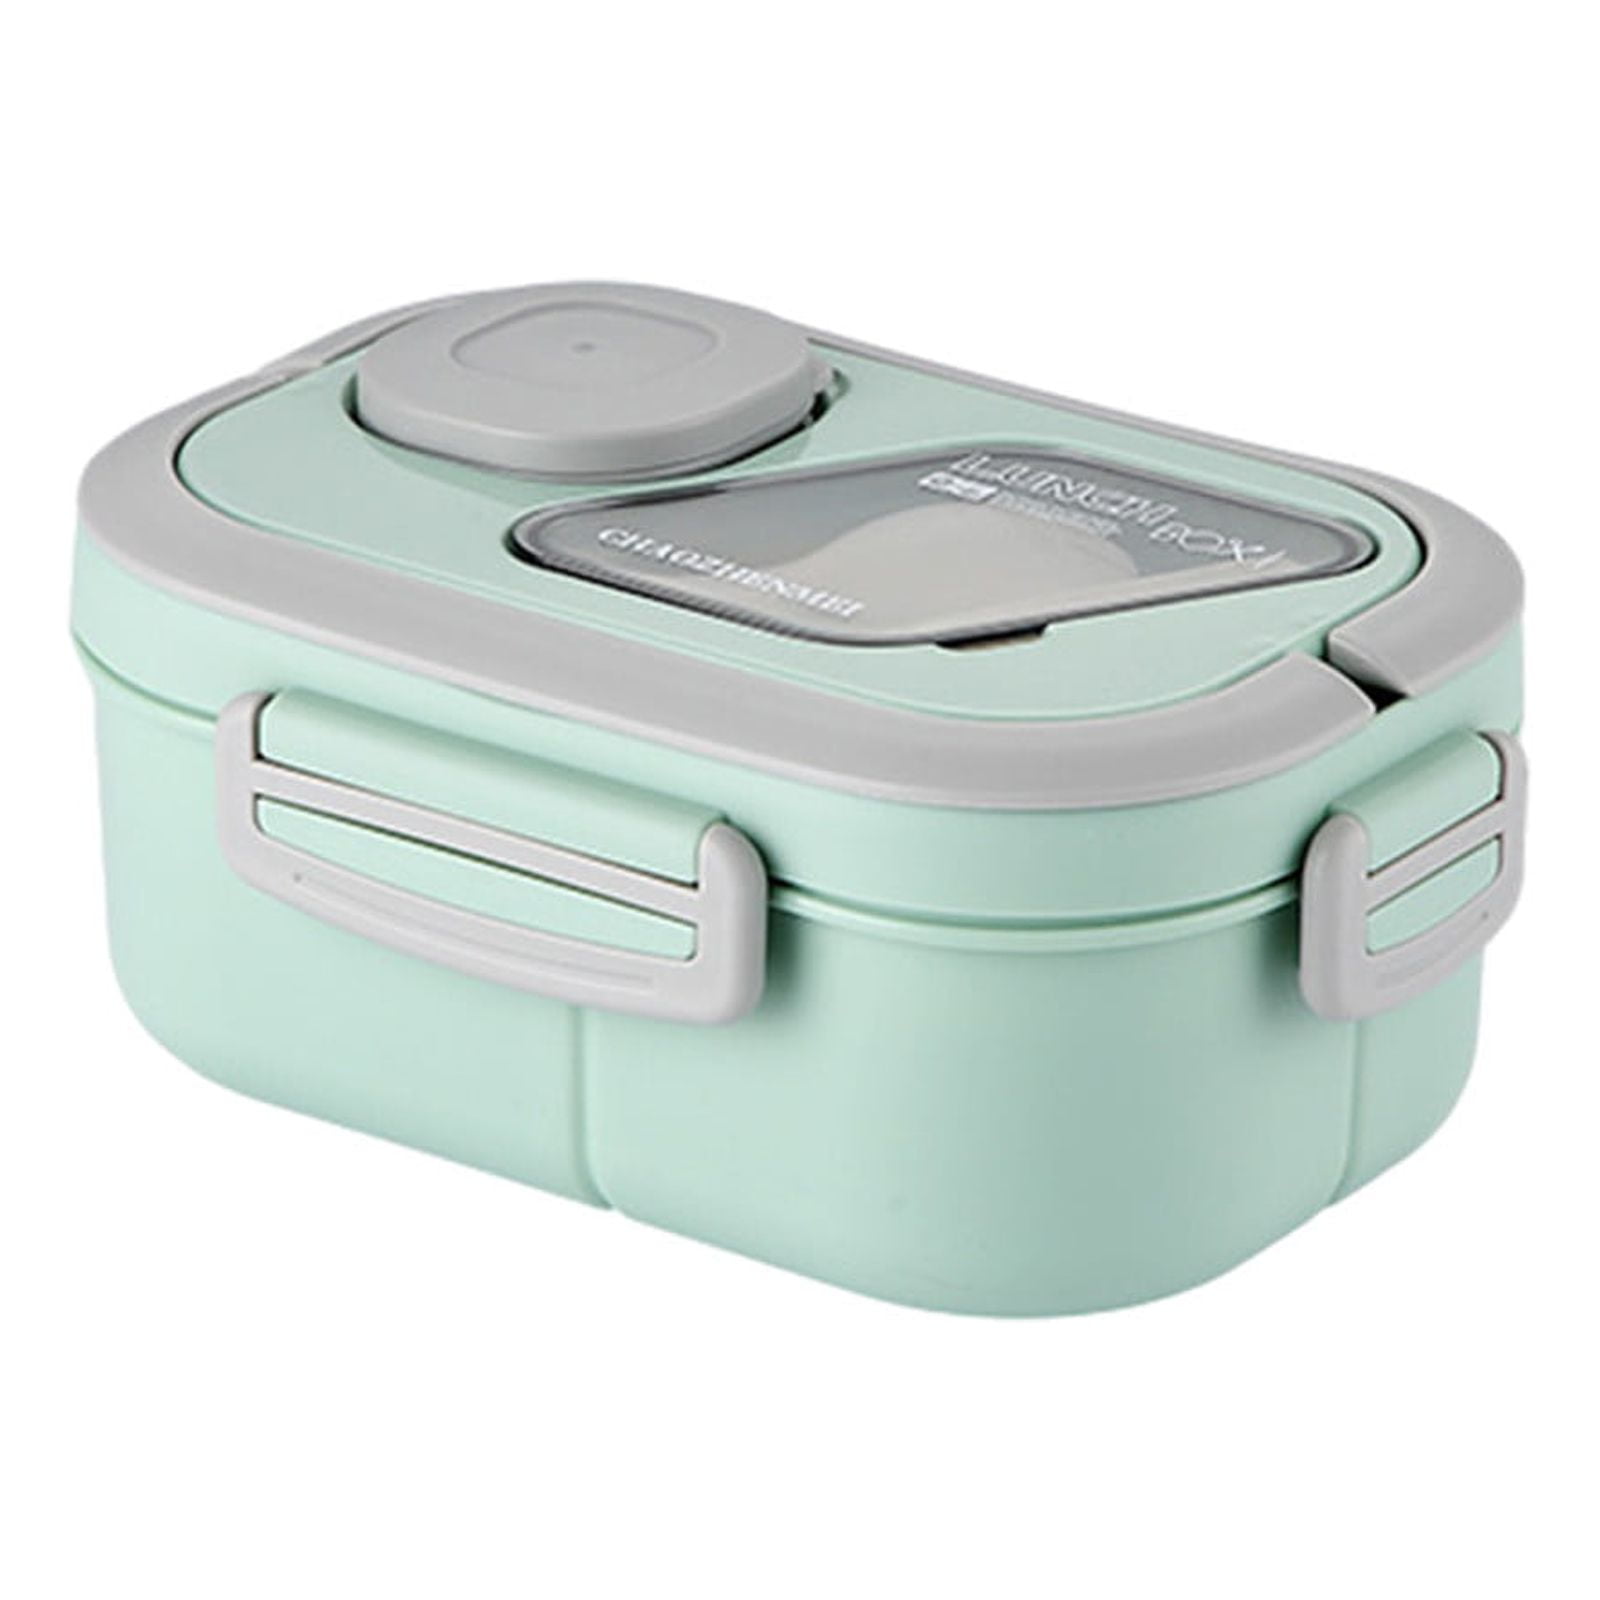 Wharick Dual-Layer Stainless Steel Bento Box for Adults & Kids,  Compartmented Food Containers Lunch Box Containers Leak-Proof,for  School,Travellers,Outdoor Picnic 